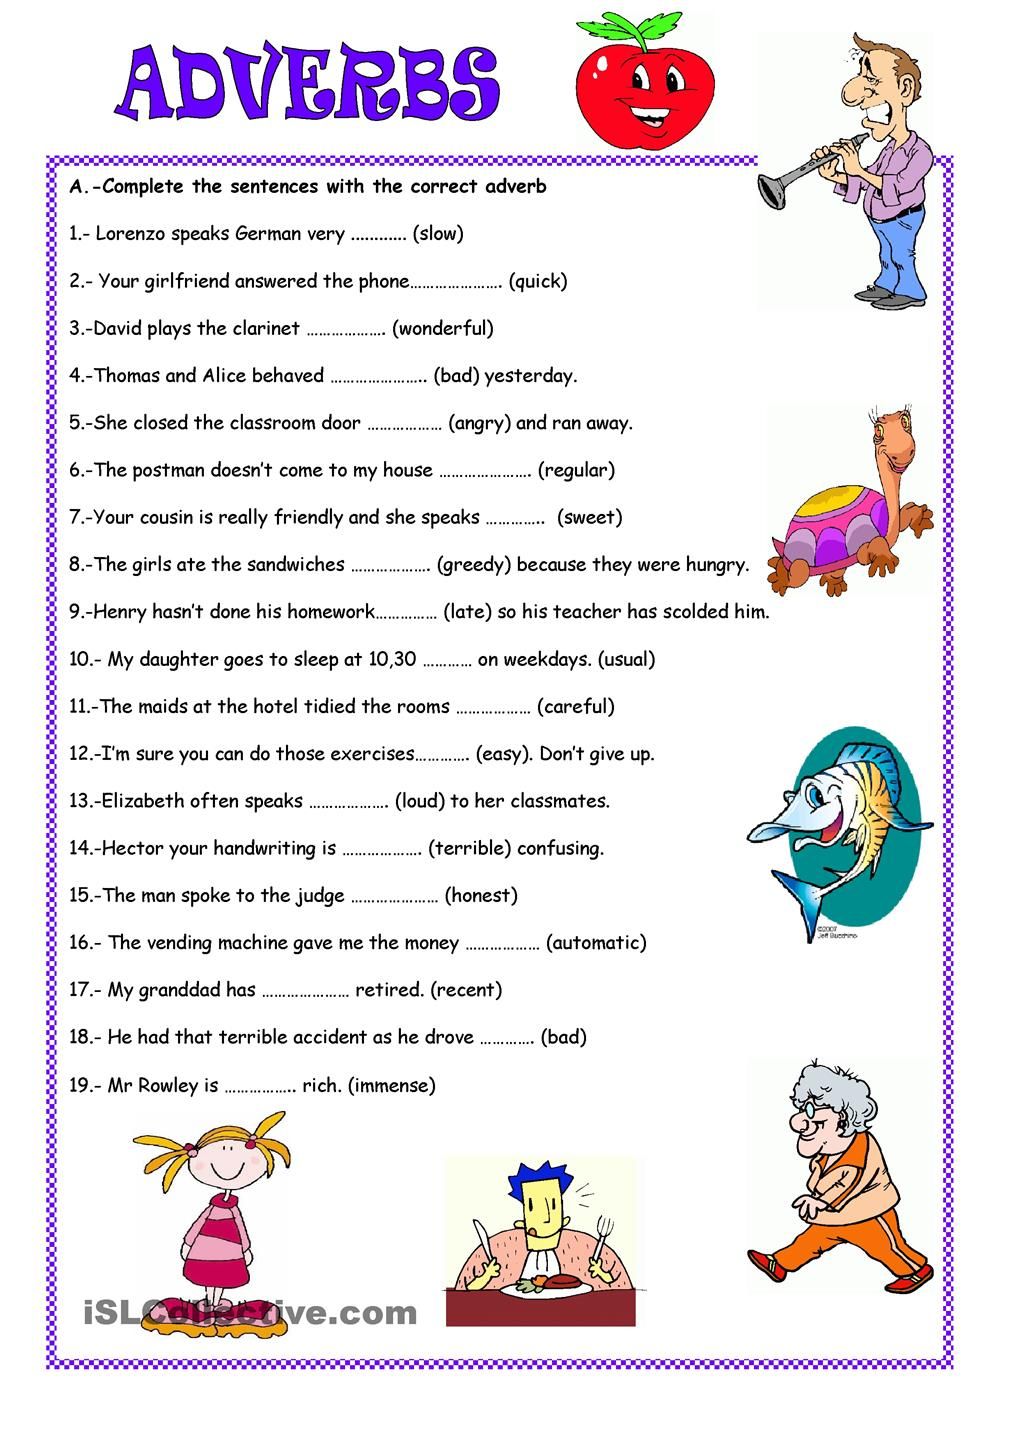 adverbs-of-possibility-exercises-pdf-fasrmint